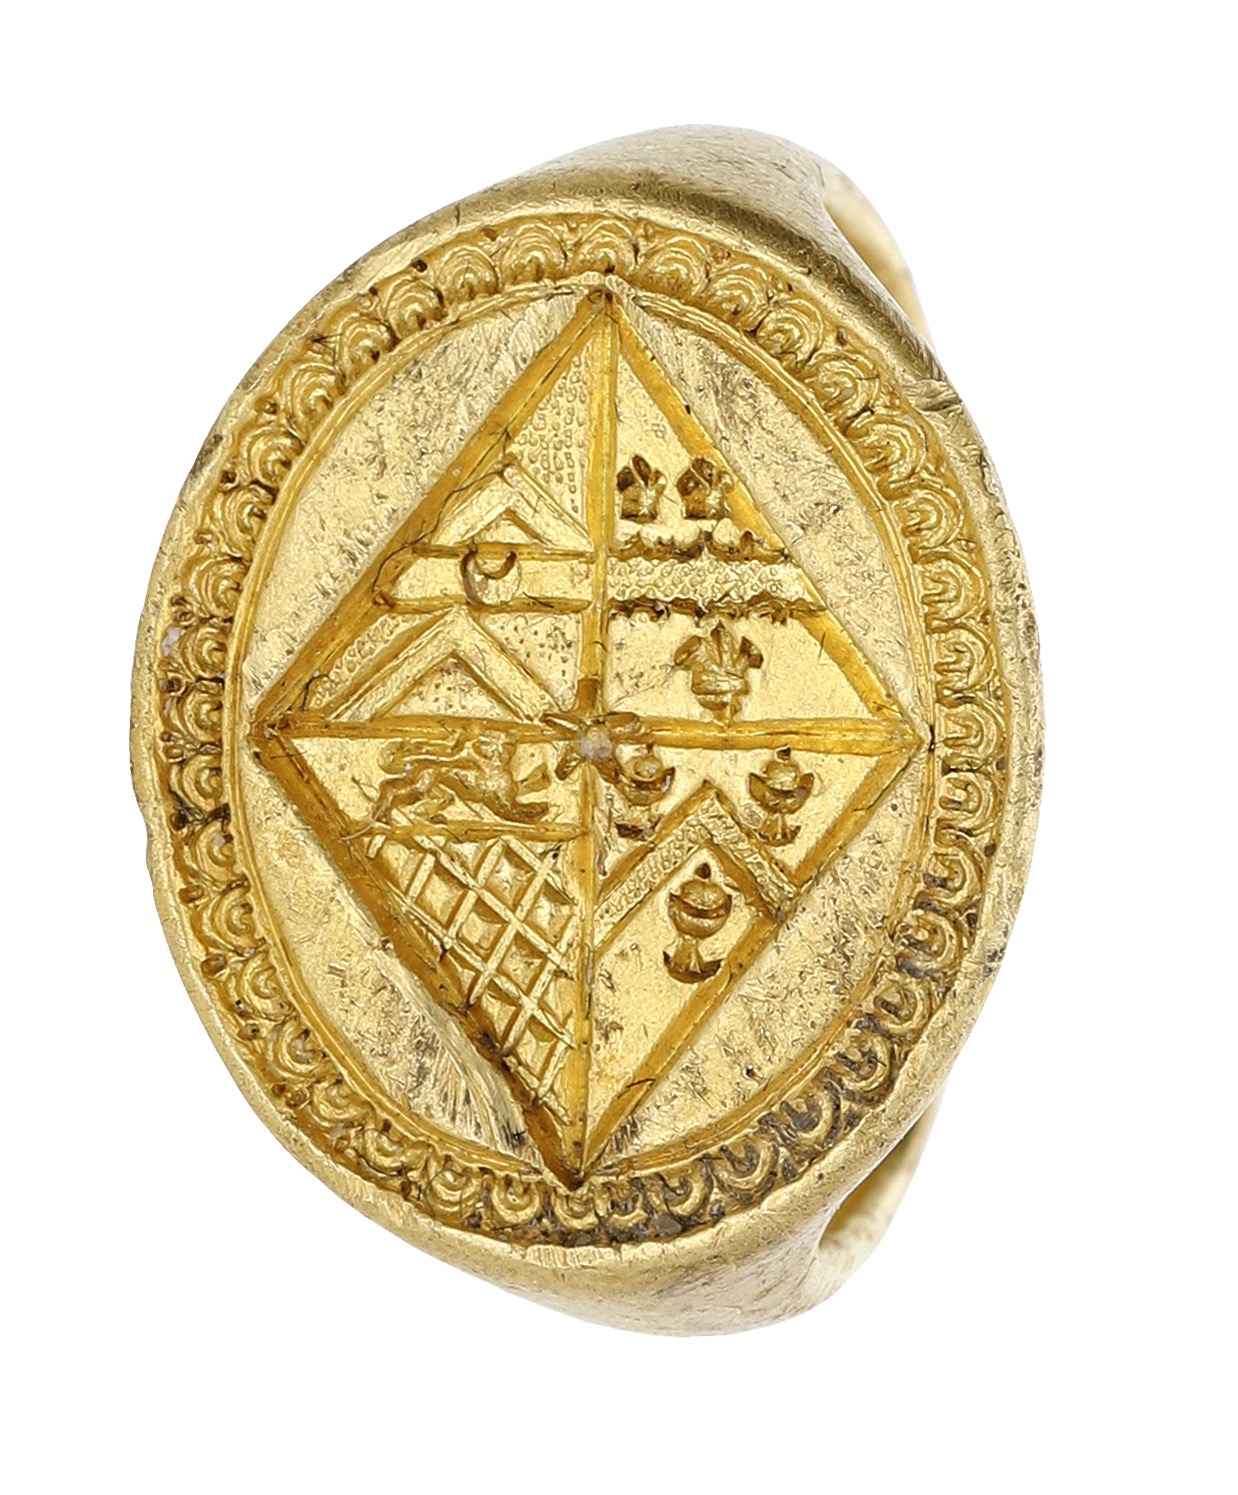 A ring that was found by a metal detectorist in a field in Roydon near Diss in Norfolk is to be sold at auction with an estimate of £14,000 to £16,000. (Noonans/ PA)